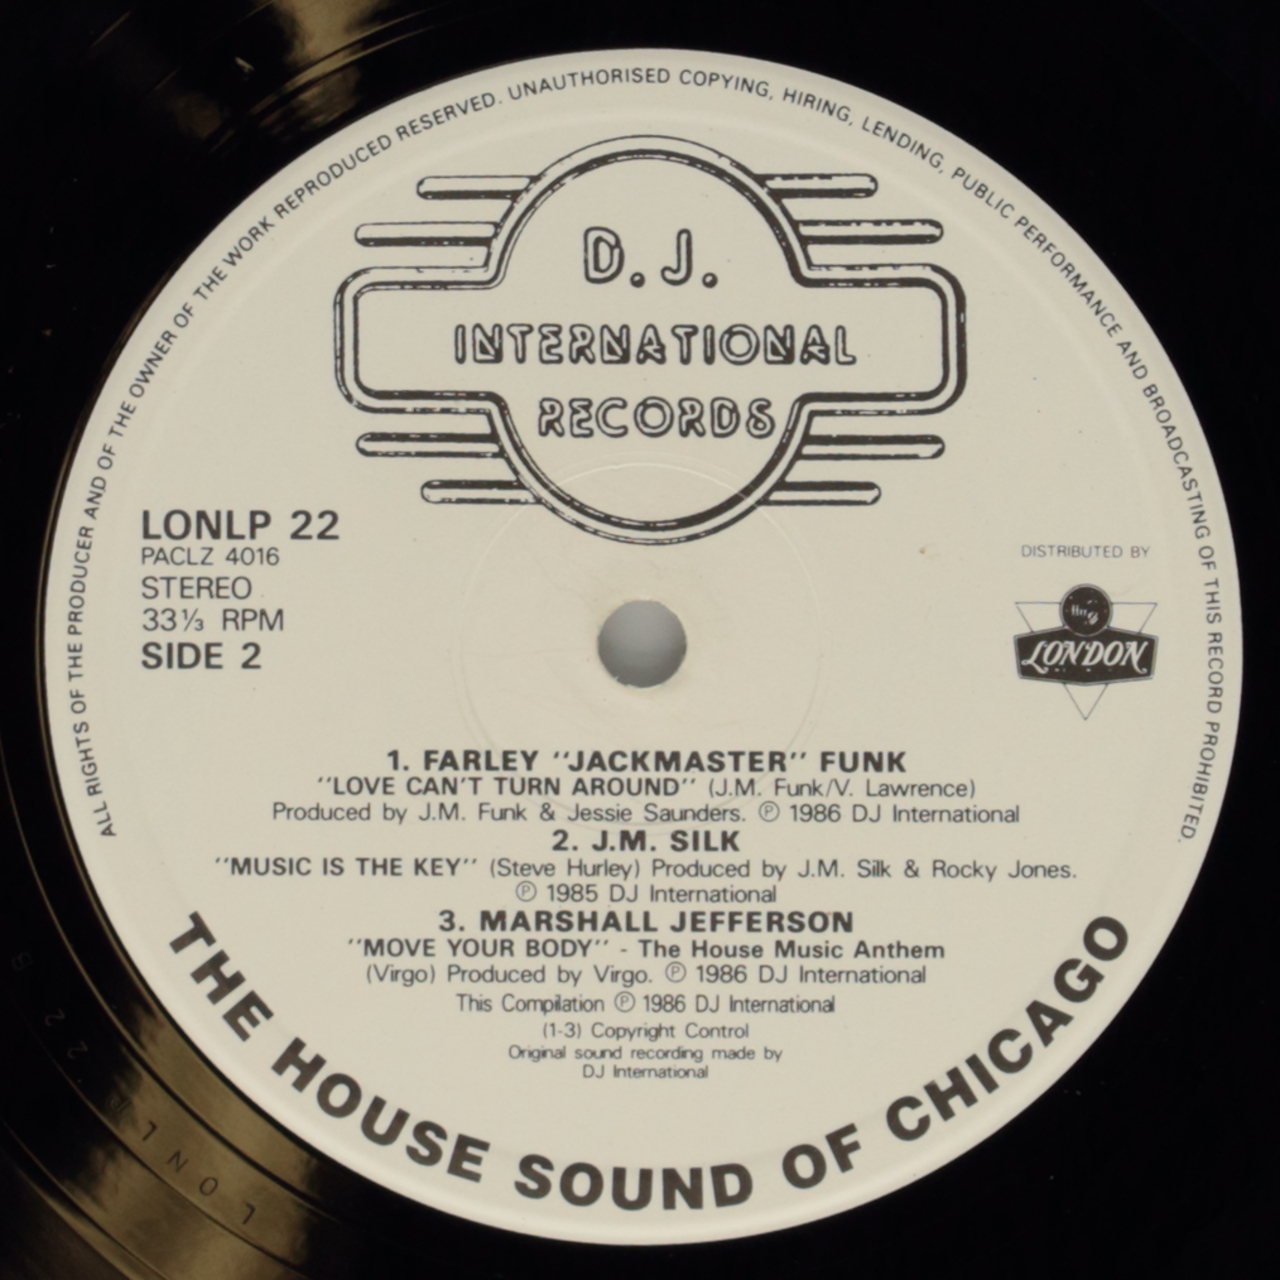 The House Sound of Chicago 